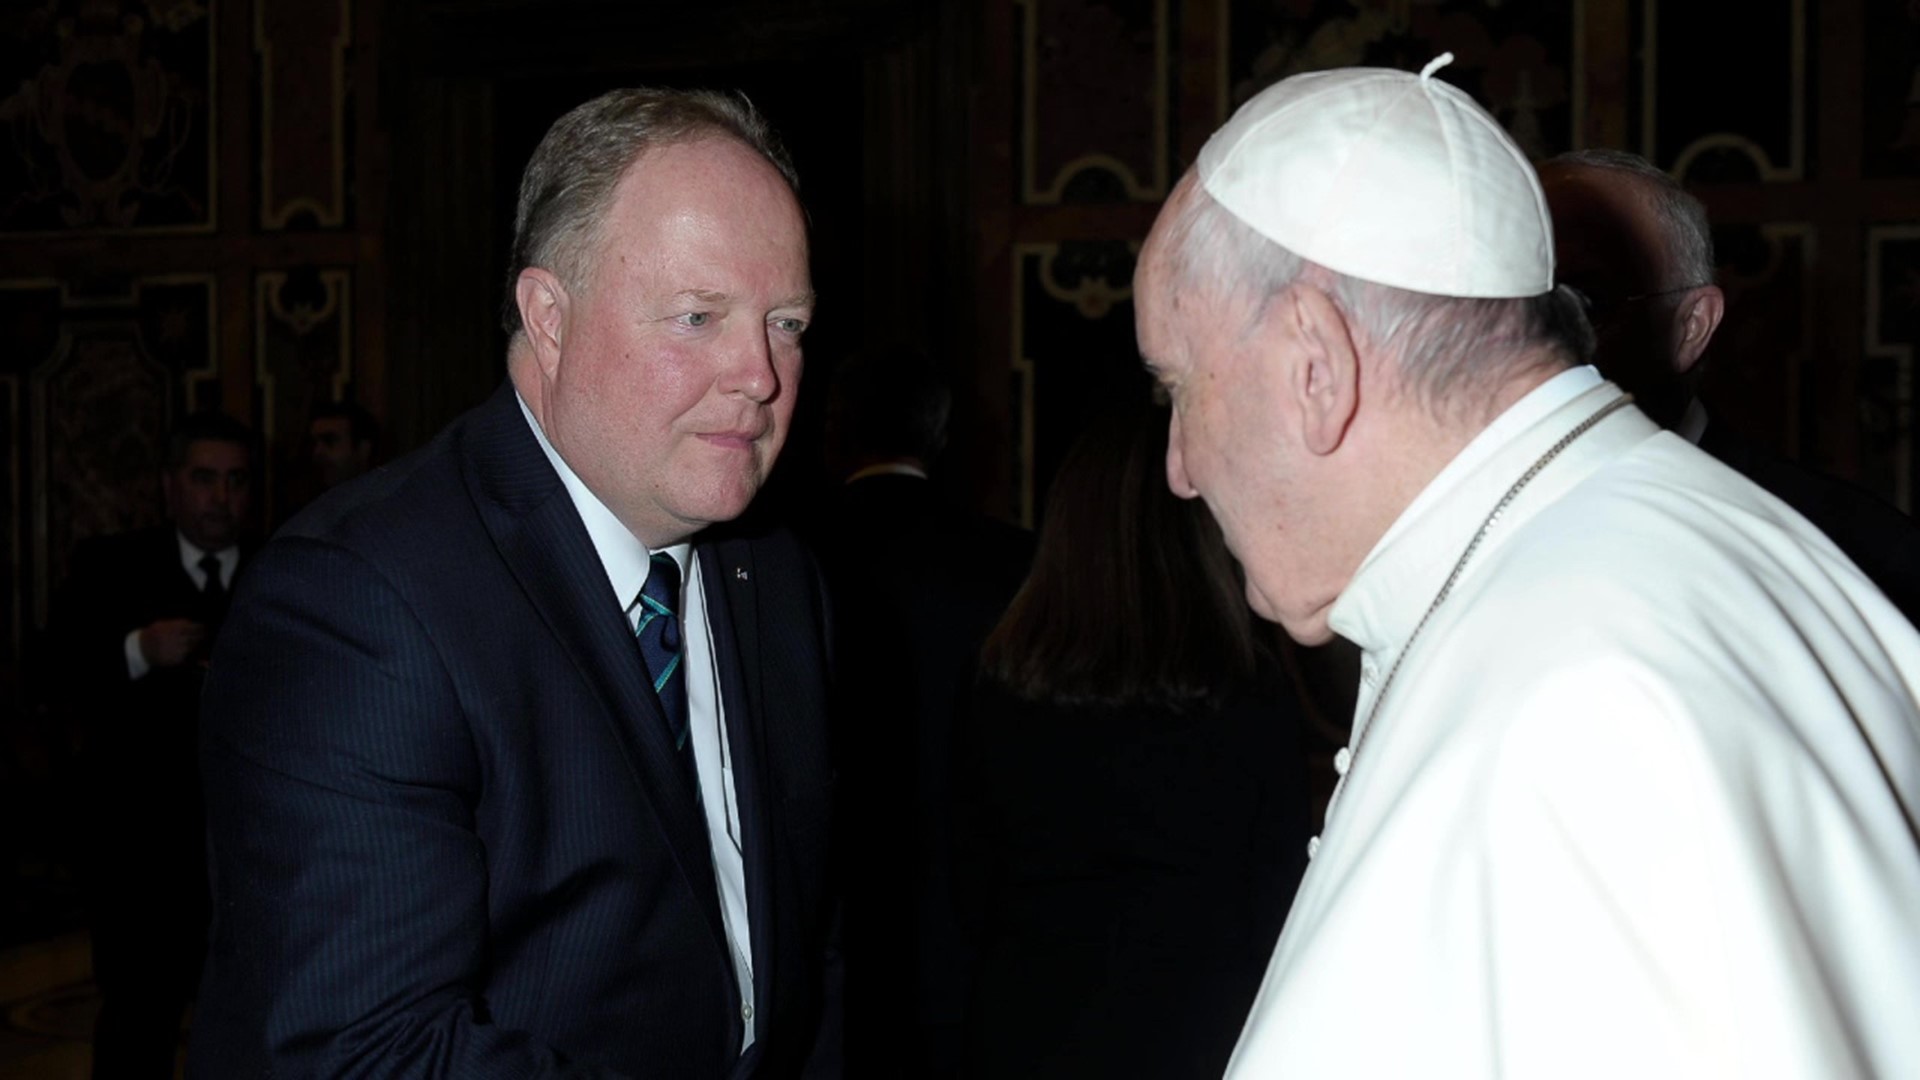 Michael O'Connor, a Frackville attorney, received papal honors from Pope Francis.